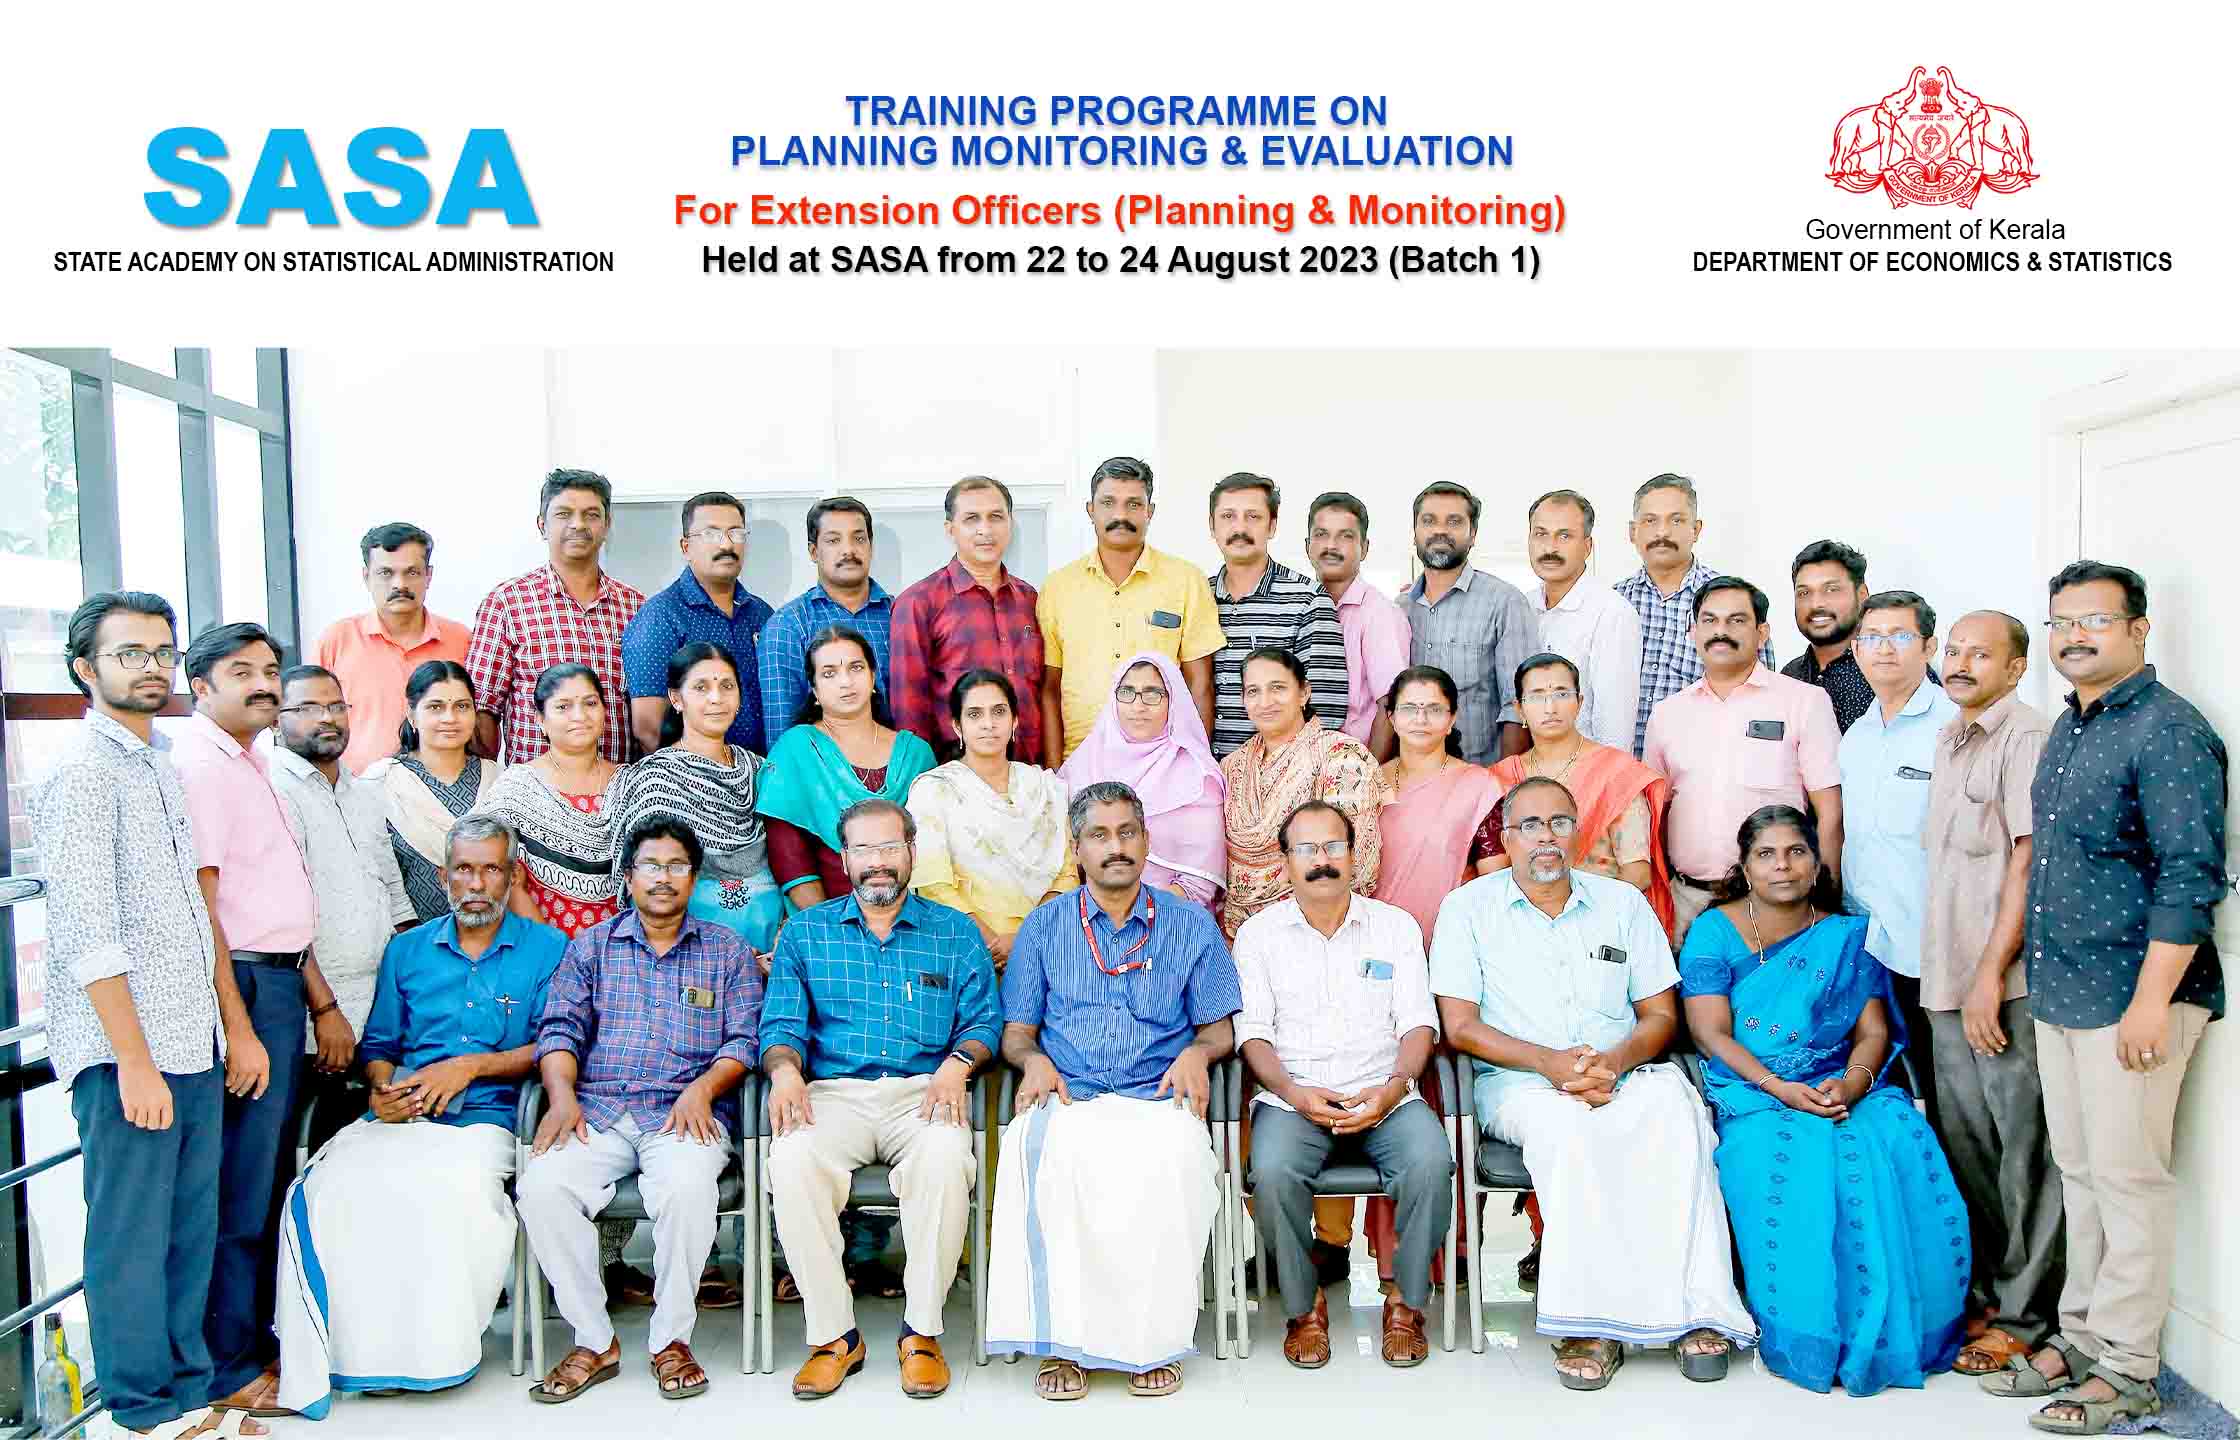 Training on Planning Monitoring & Evaluation to EO (P&M) Batch 1 held at SASA from 22-24 Aug 2023